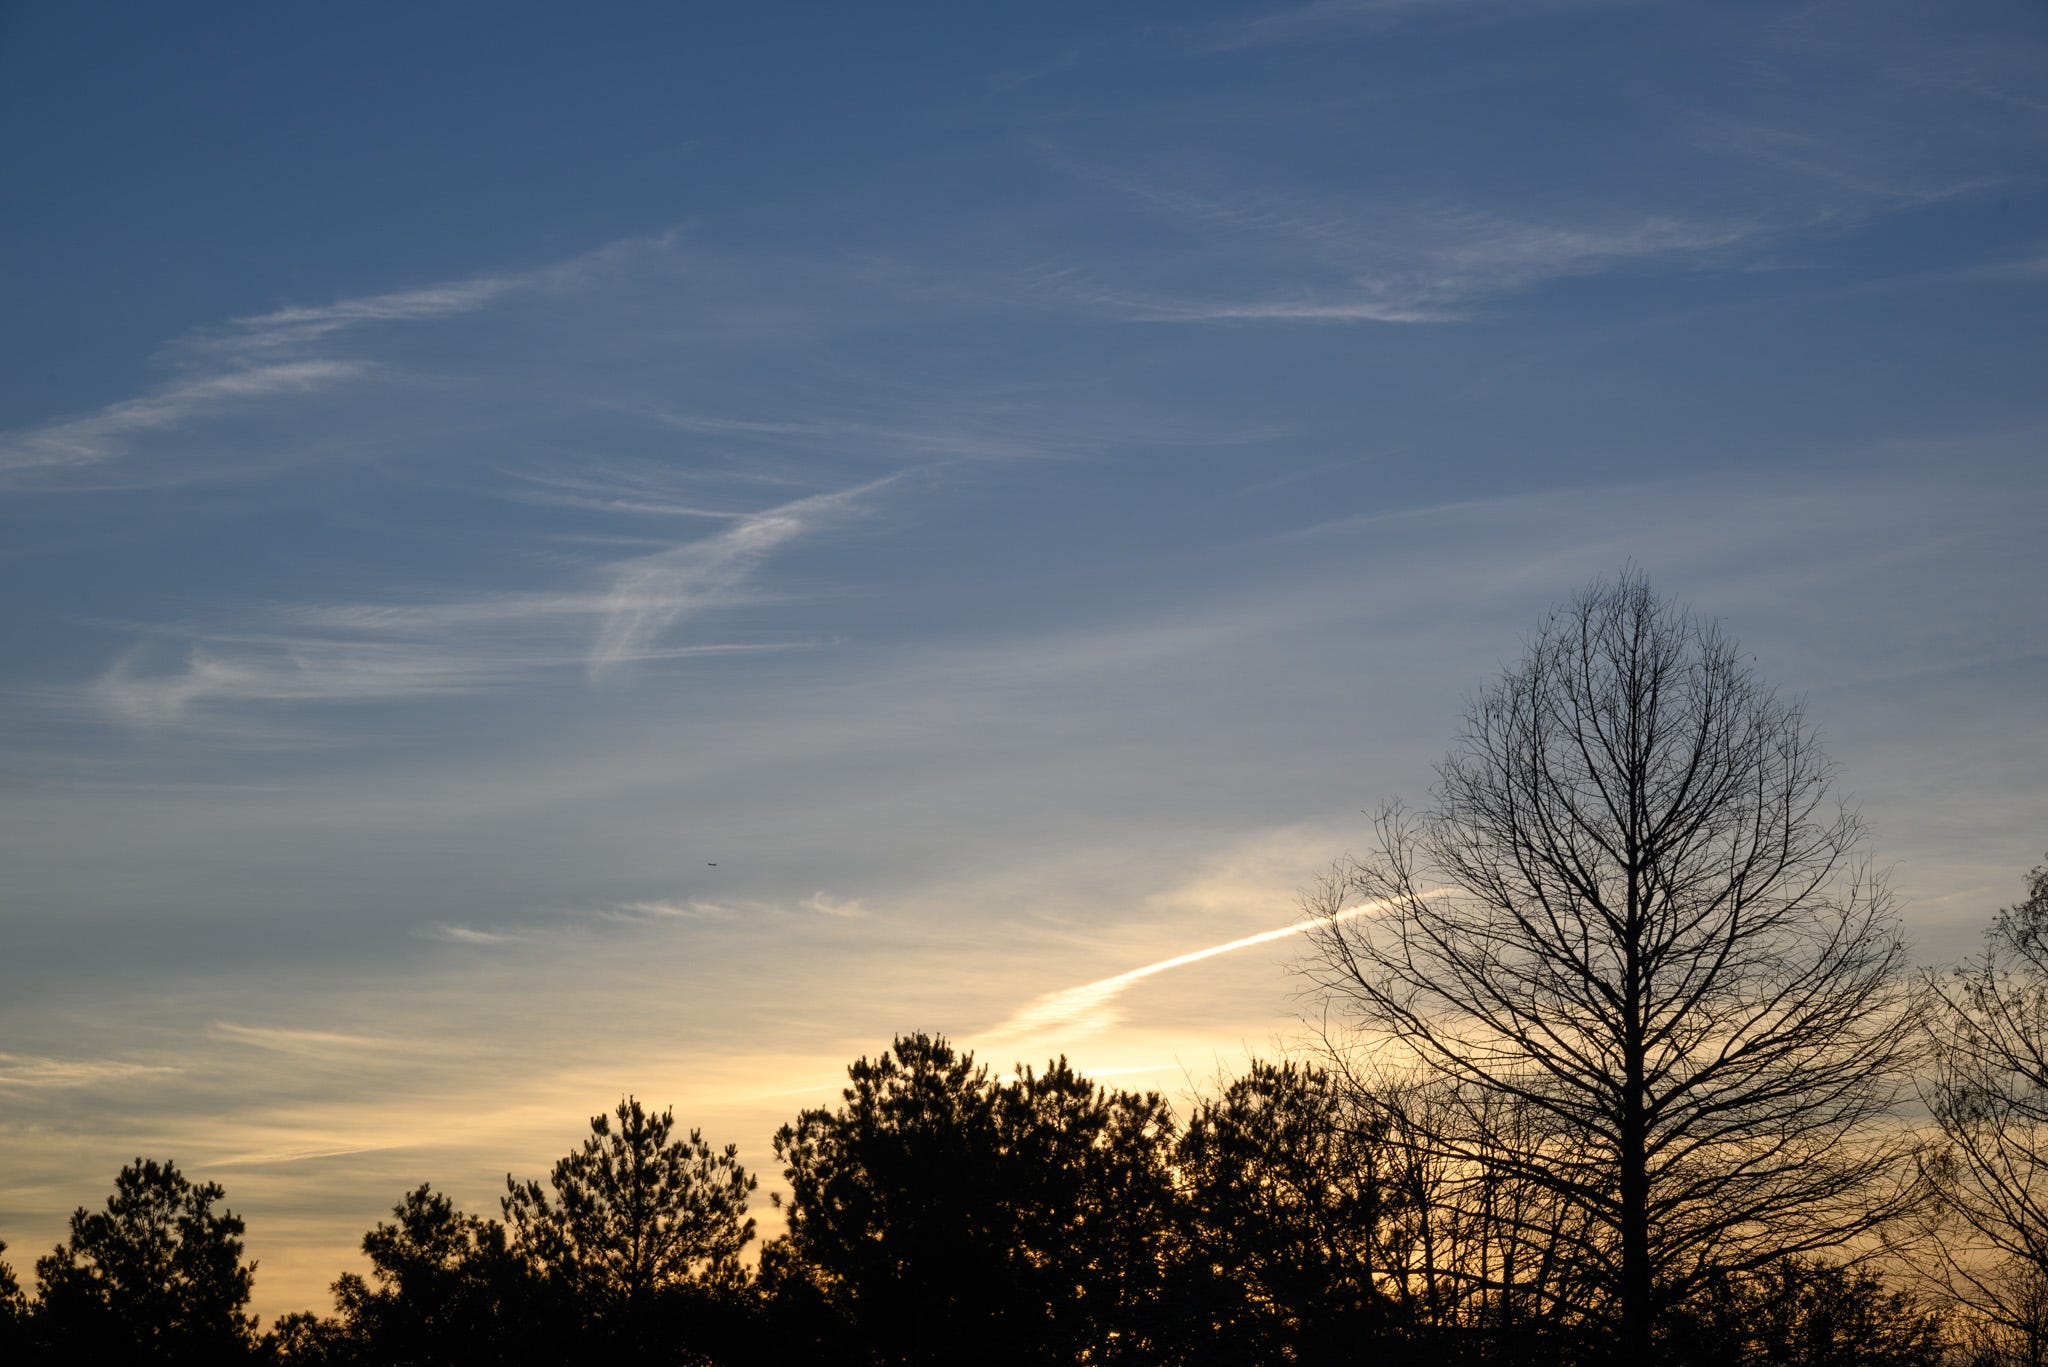 the sun rising over a line of trees with blue sky and wisoy clouds above